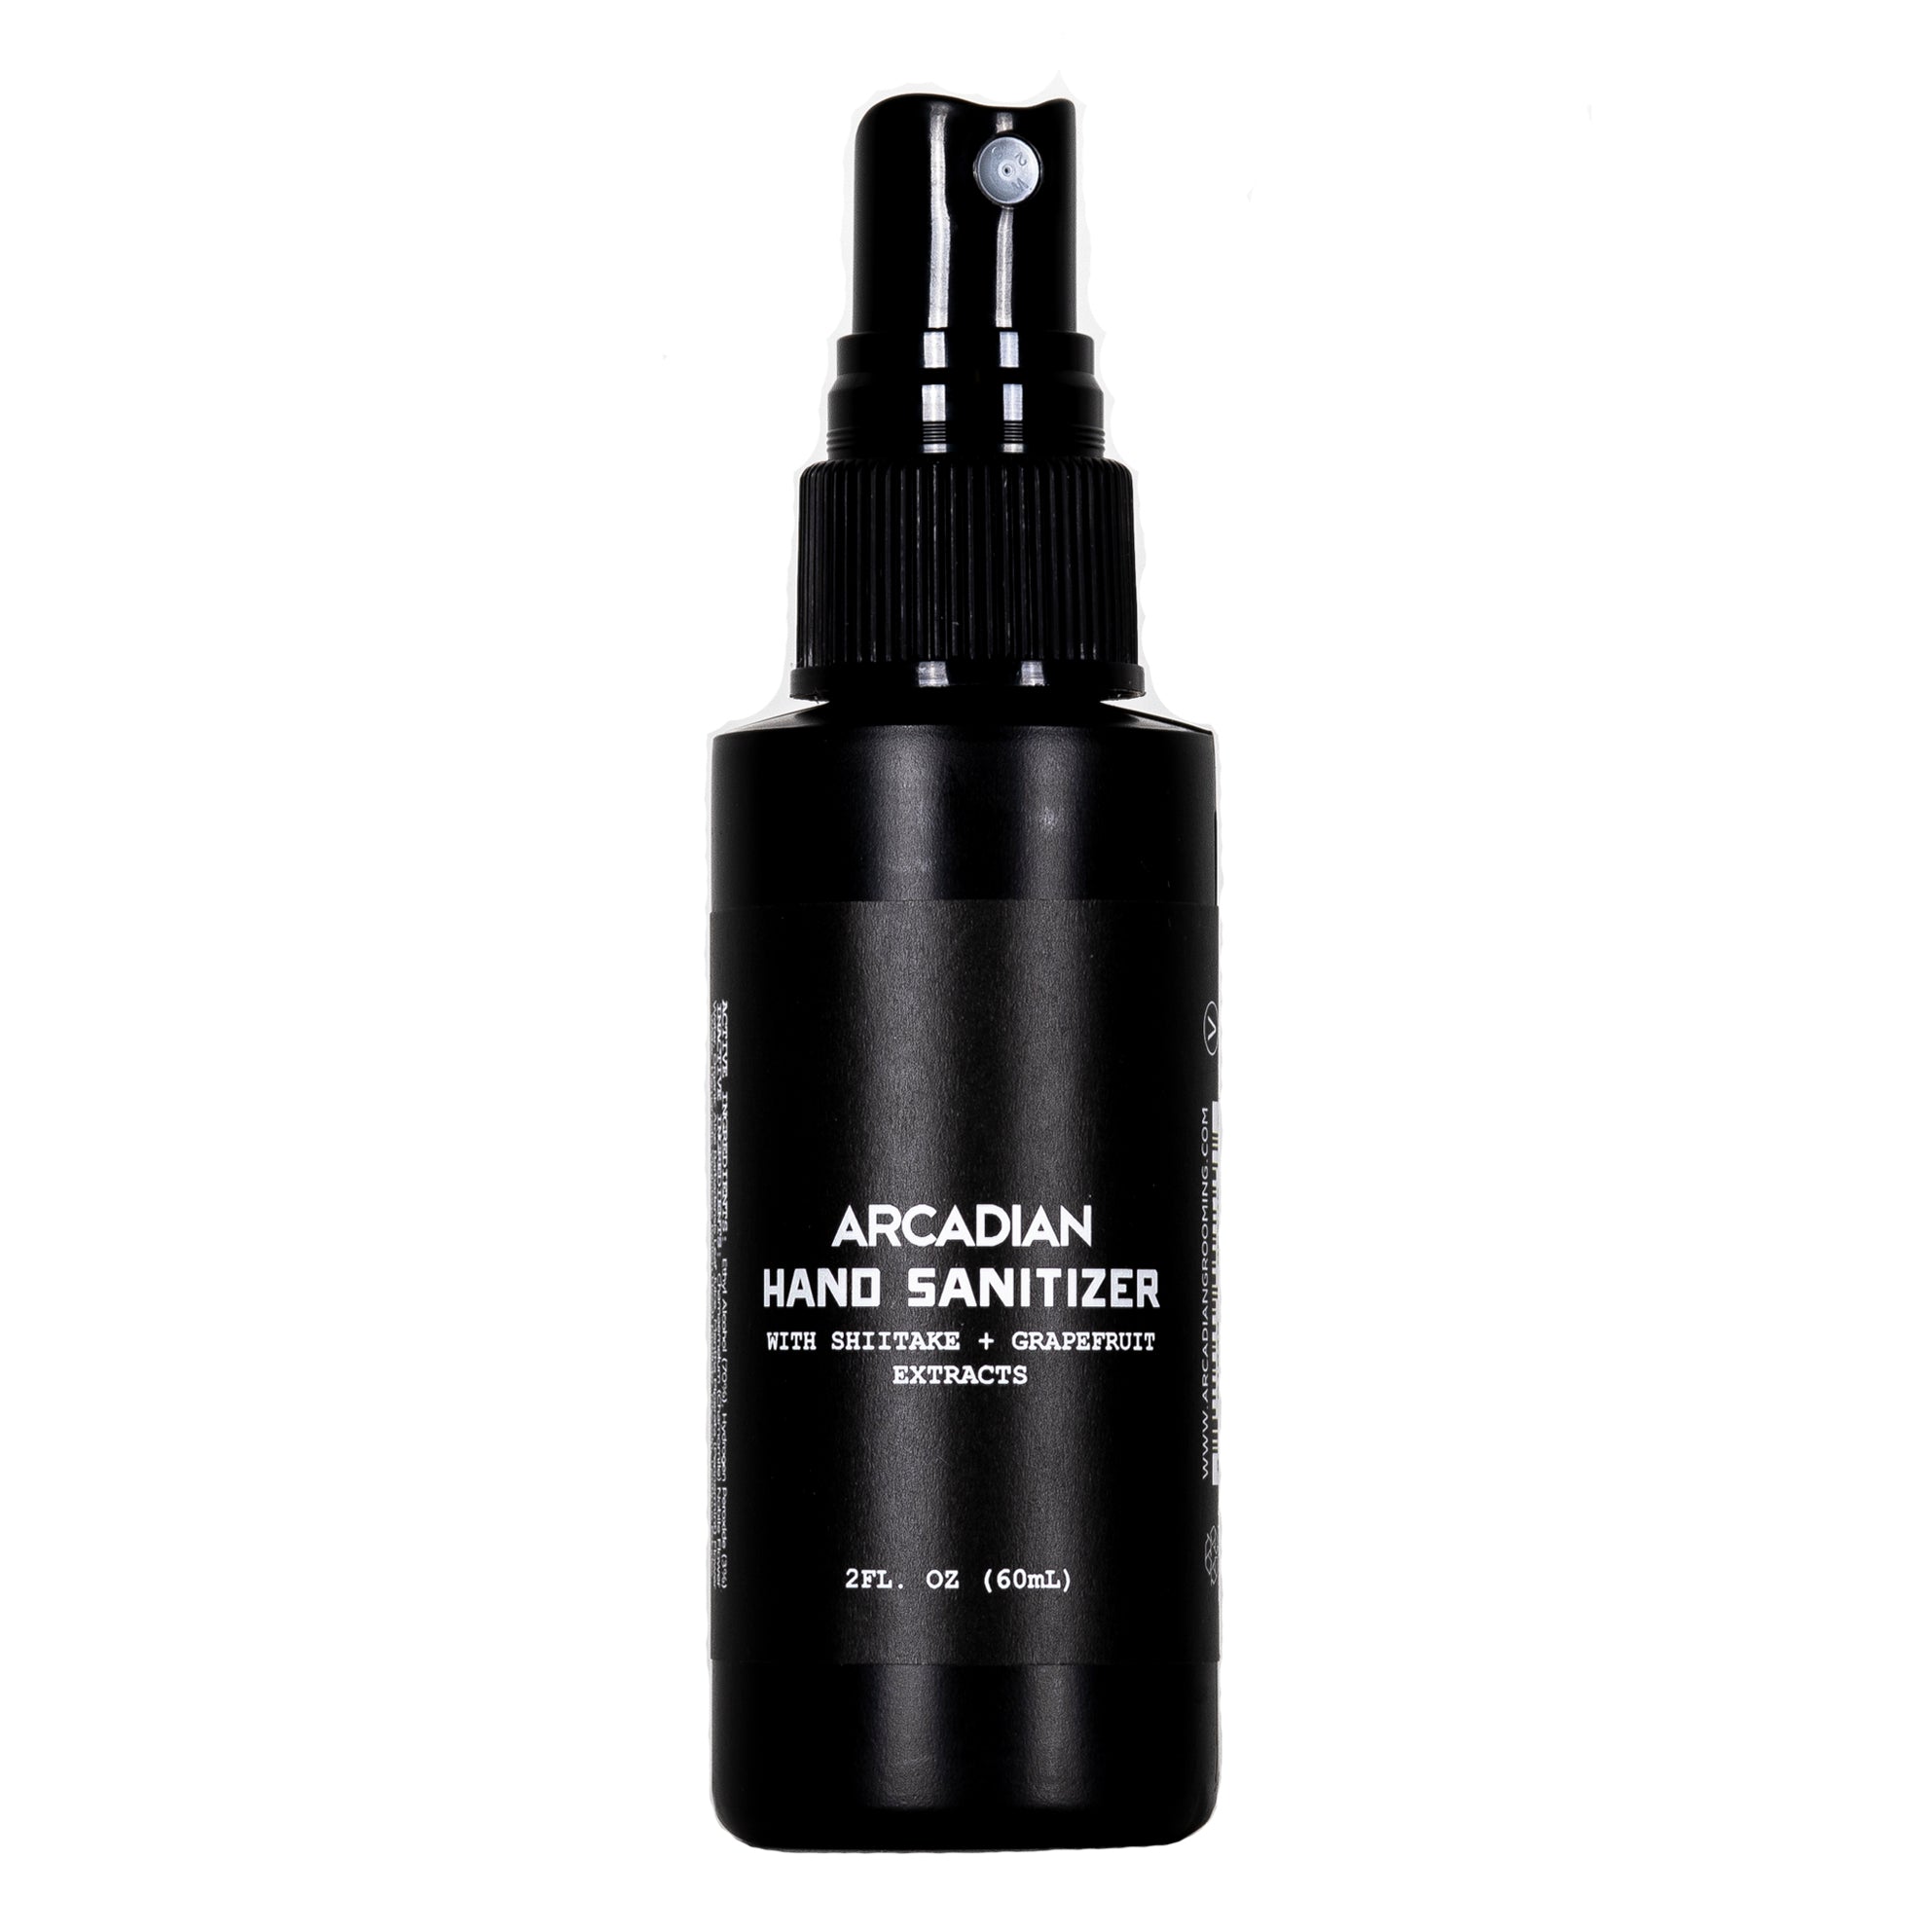 Hand Sanitizer (Limited) - Arcadian Grooming: Pomade, Beard Care, Men's Grooming Supplies